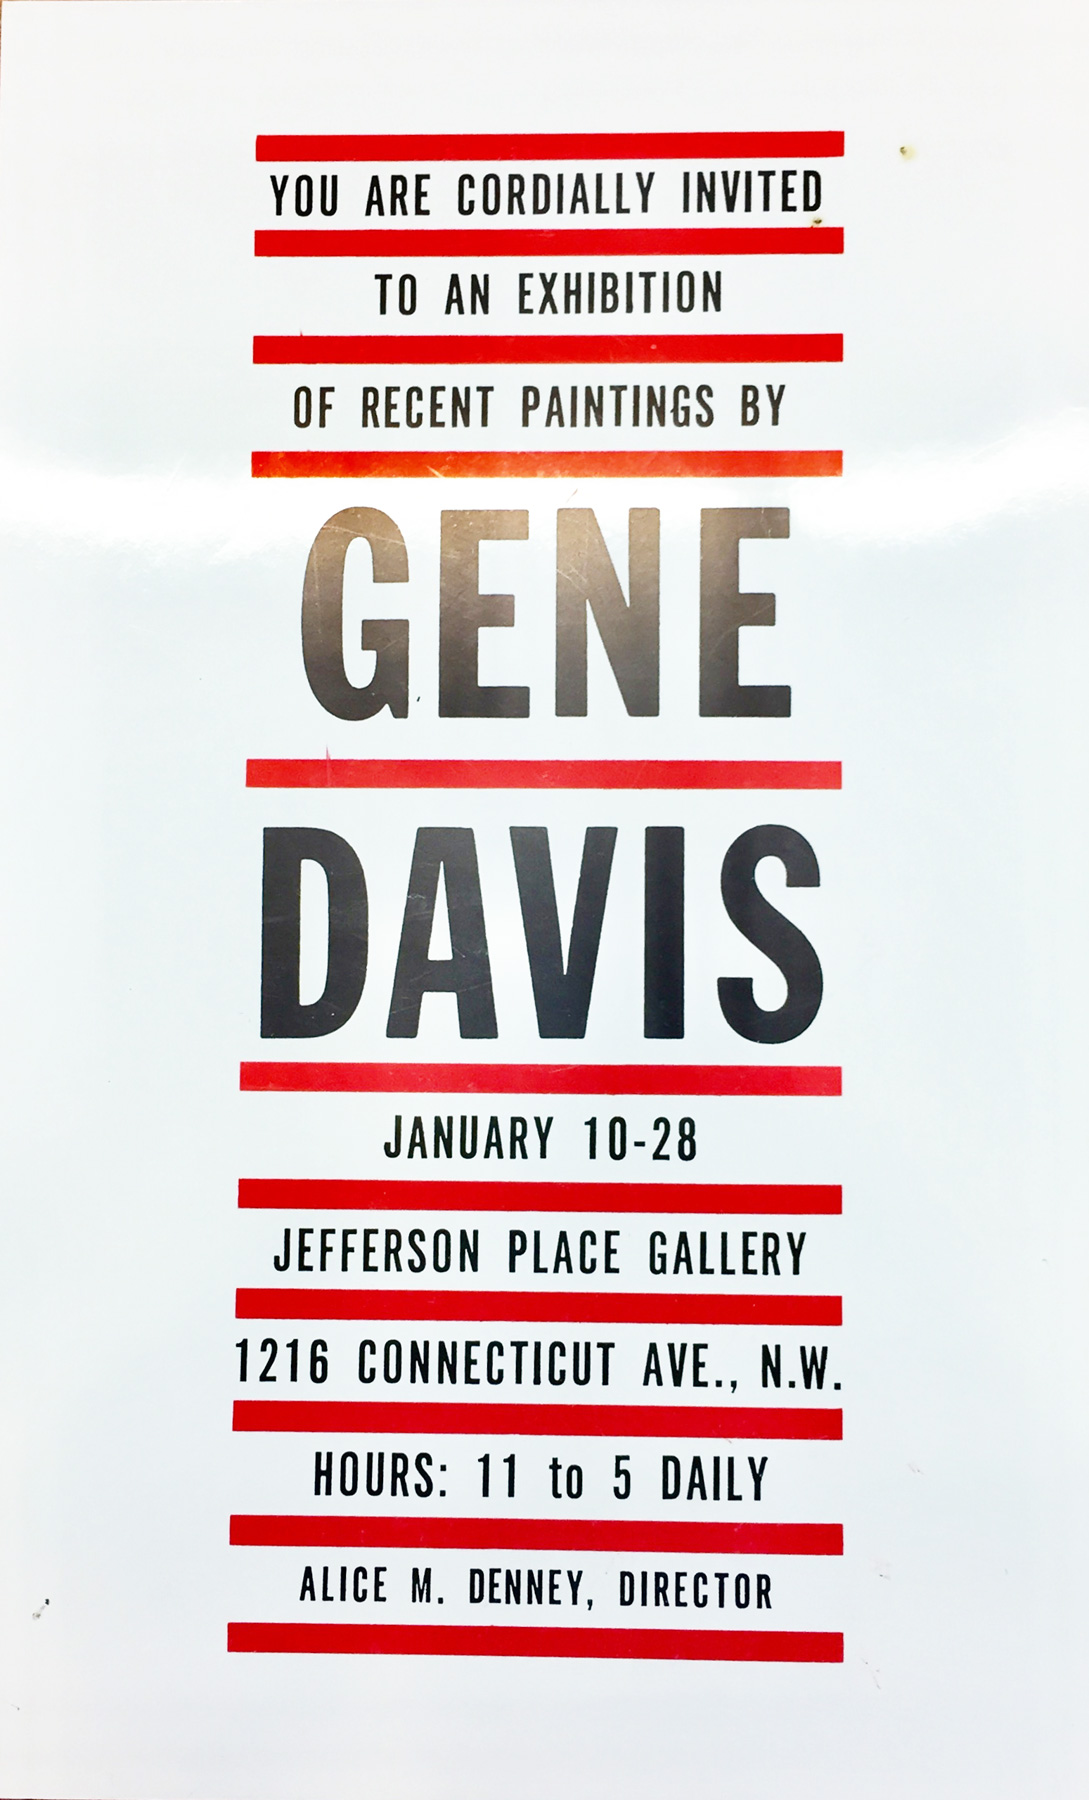 Announcement card for Gene Davis's Recent Paintings at Jefferson Place Gallery